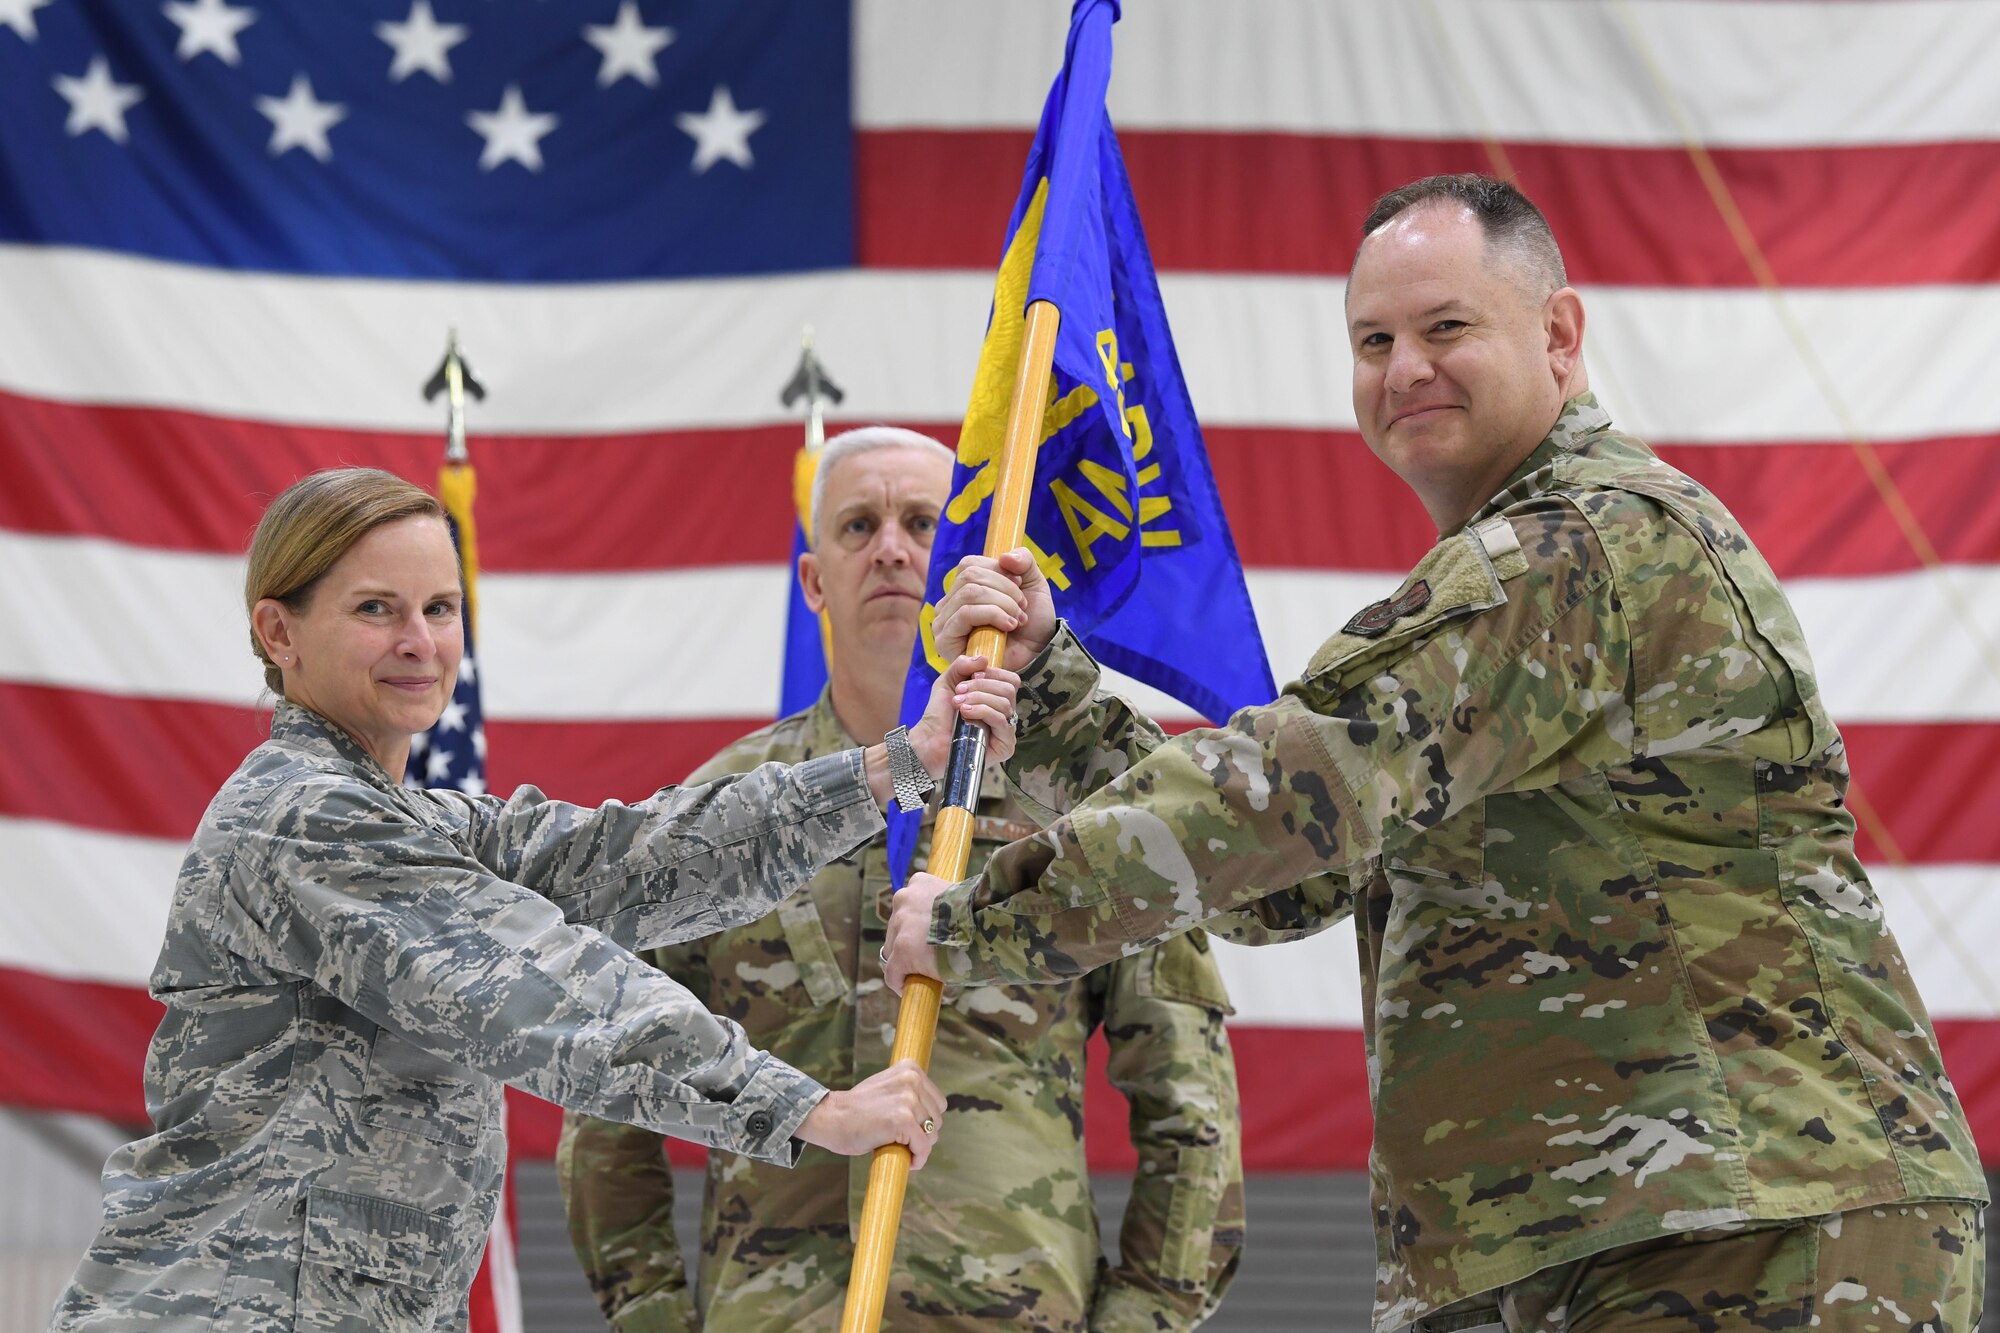 Maj. Matthew Dickerson, 434th Aircraft Maintenance Squadron commander, symbolically accepts a guidon from Col. Arianne Mayberry, 434th Maintenance Group commander, during a change of command ceremony at Grissom Air Reserve Base, Oct. 4, 2020. Dickerson moved into the role after three years as commander of the 434th Maintenance Operations Section.